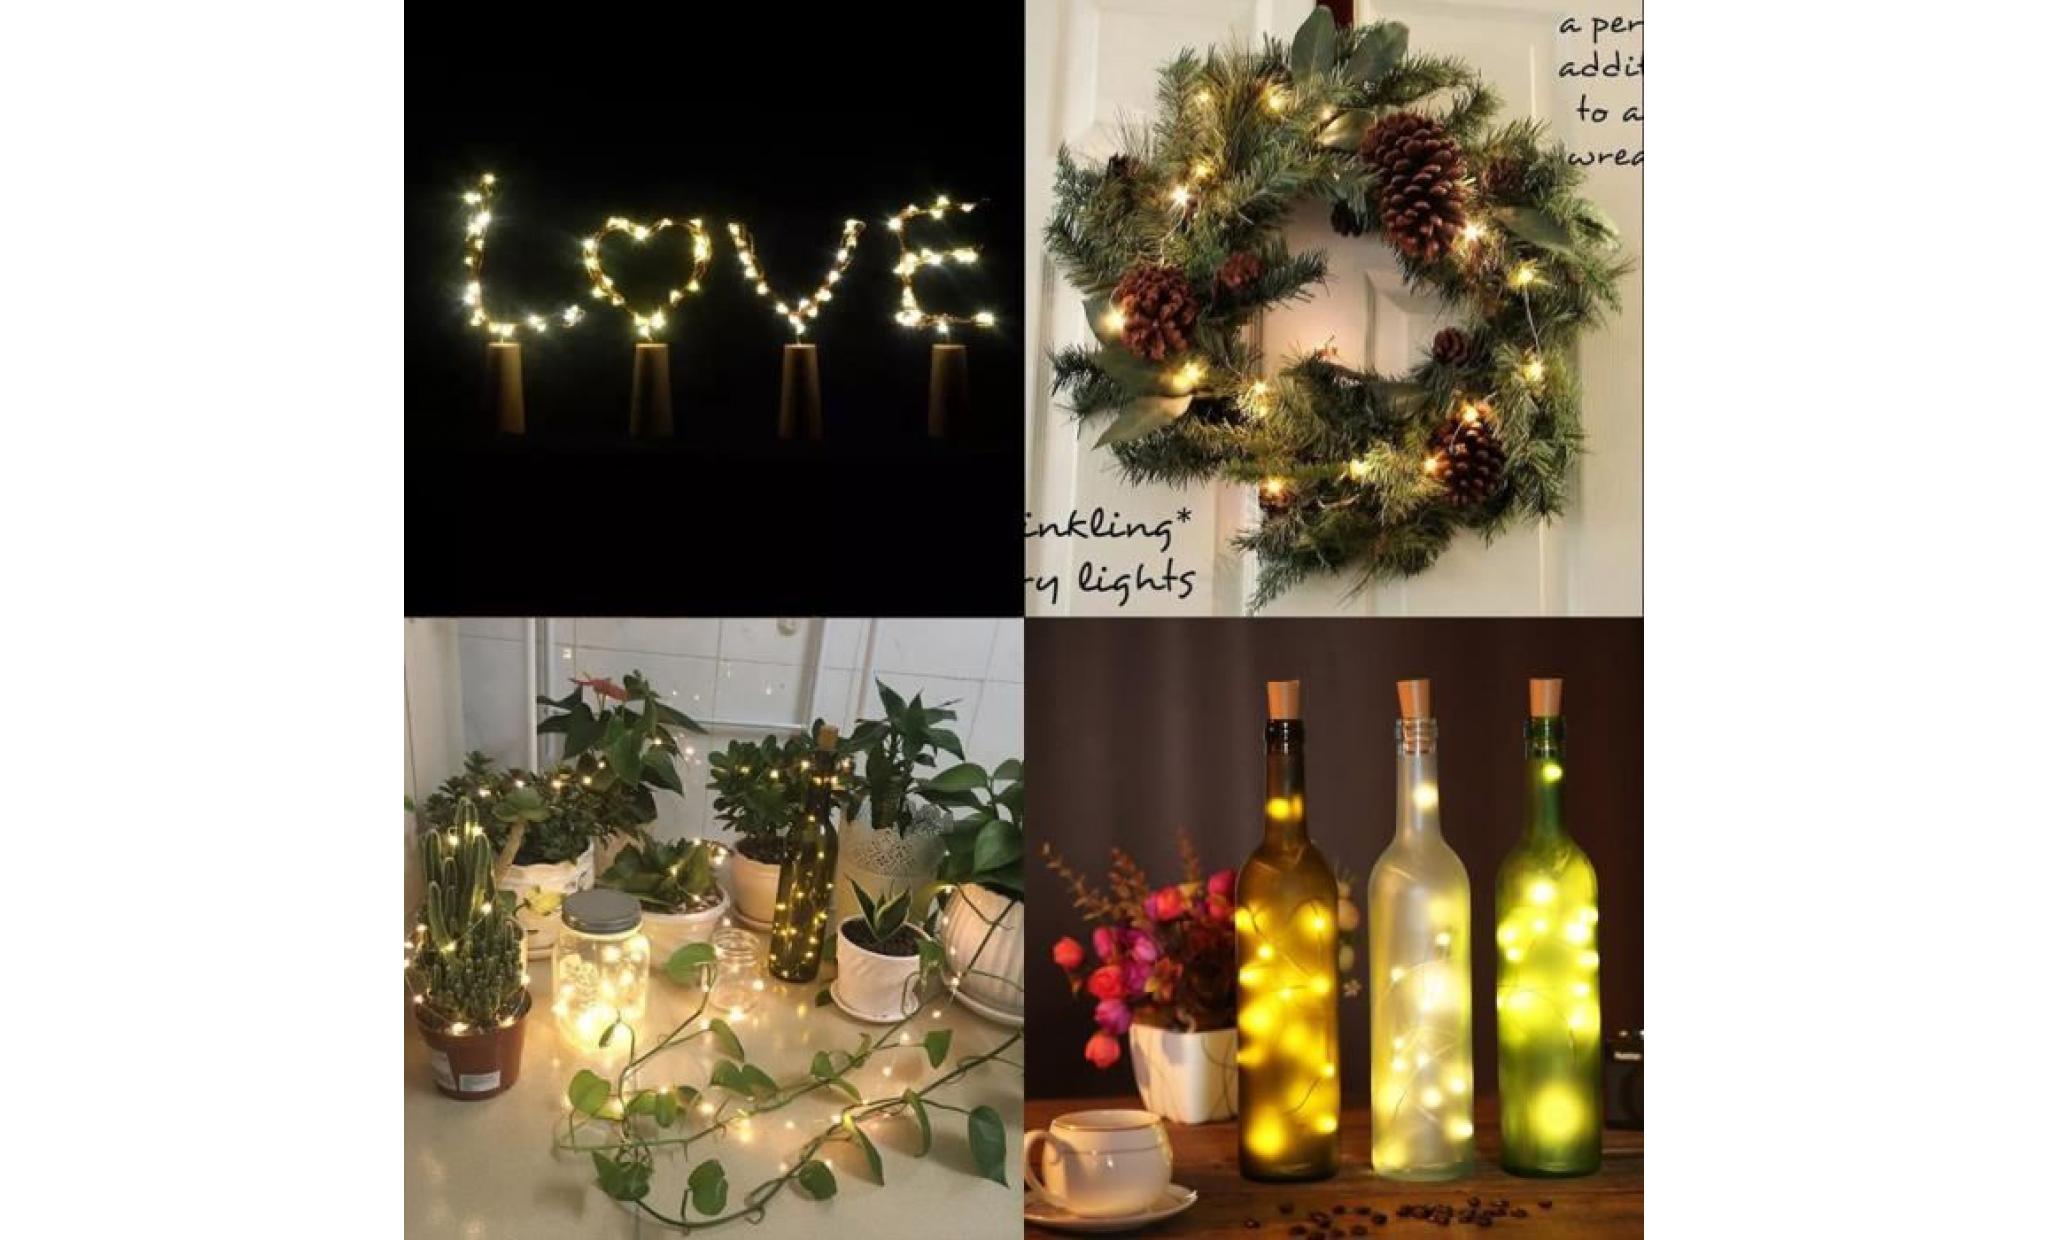 cork shaped 15 led night light starry lights wine bottle lamp for party colorful qinhig1581 pas cher